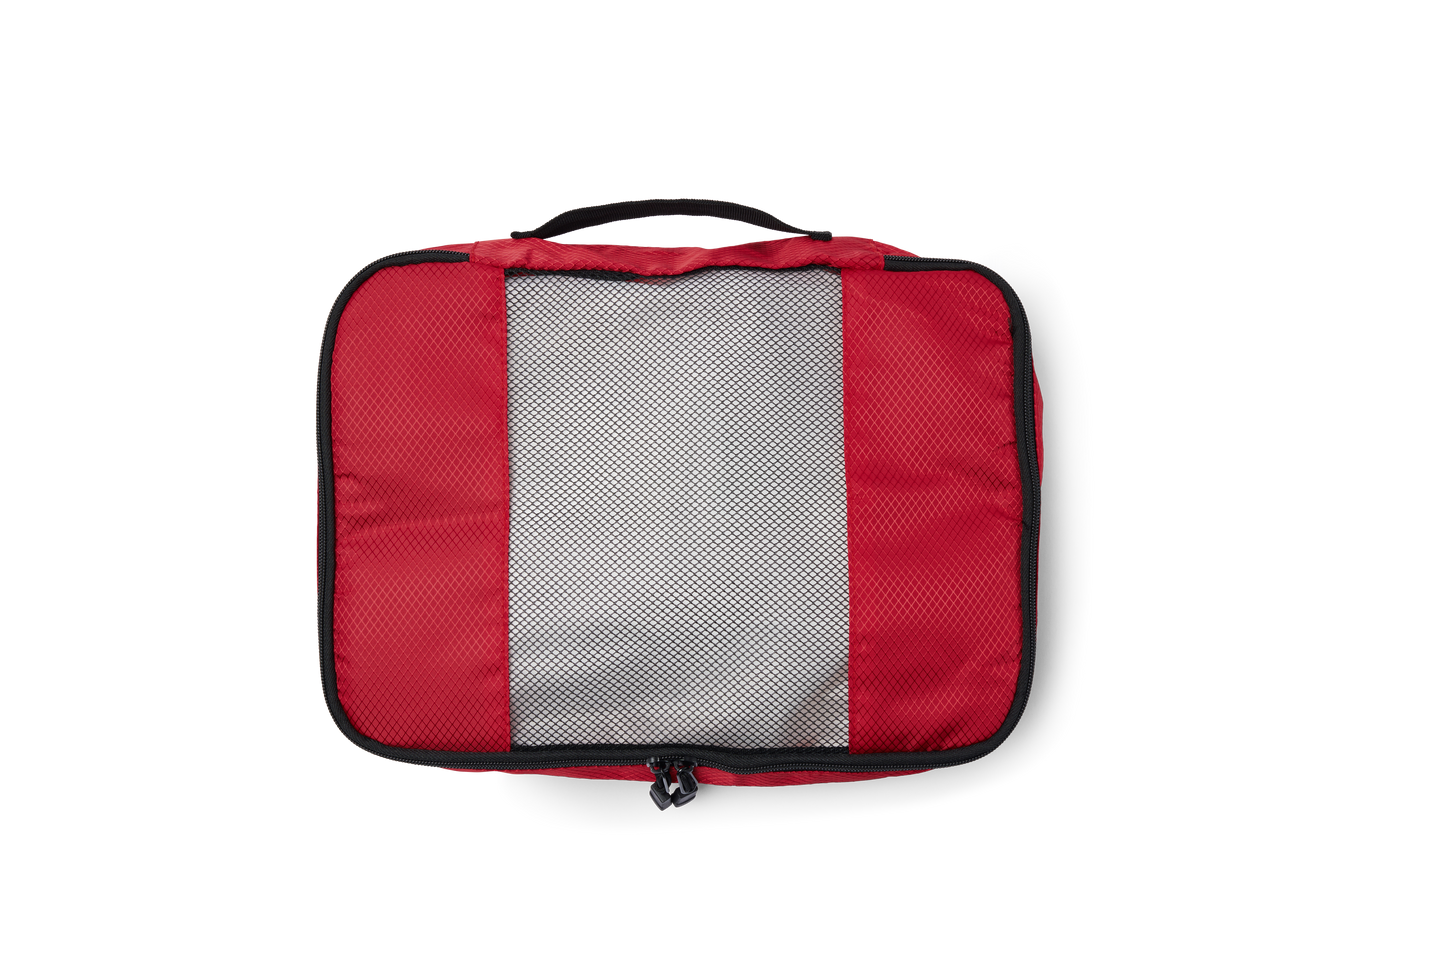 SYDNEY LUGGAGE PACKING CUBES SET OF 4 RED